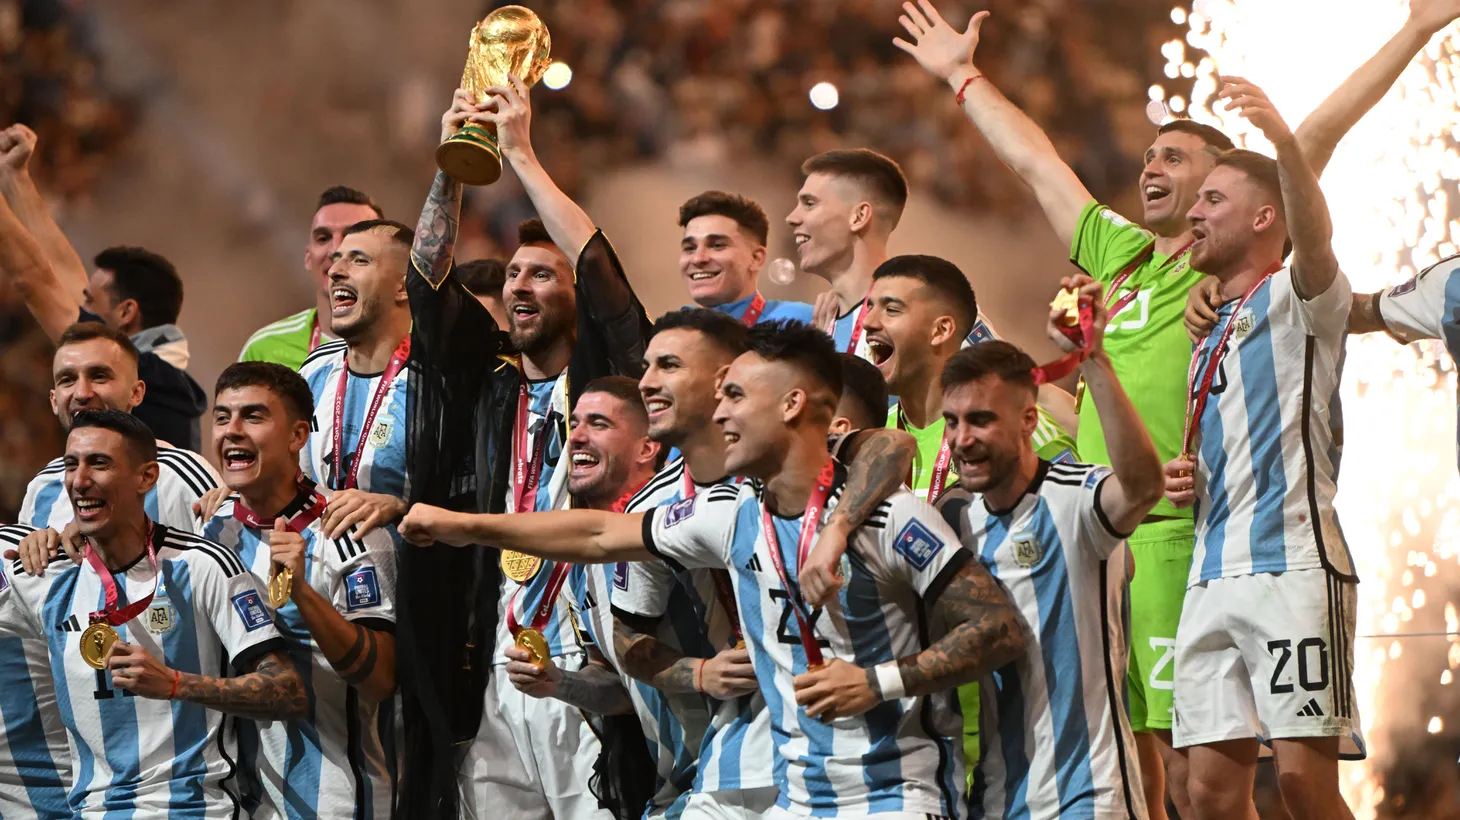 Lionel Messi (10) and Argentina players celebrate after winning the FIFA World Cup Qatar 2022 final match against France at Lusail Stadium on December 18, 2022 in Lusail, Qatar.